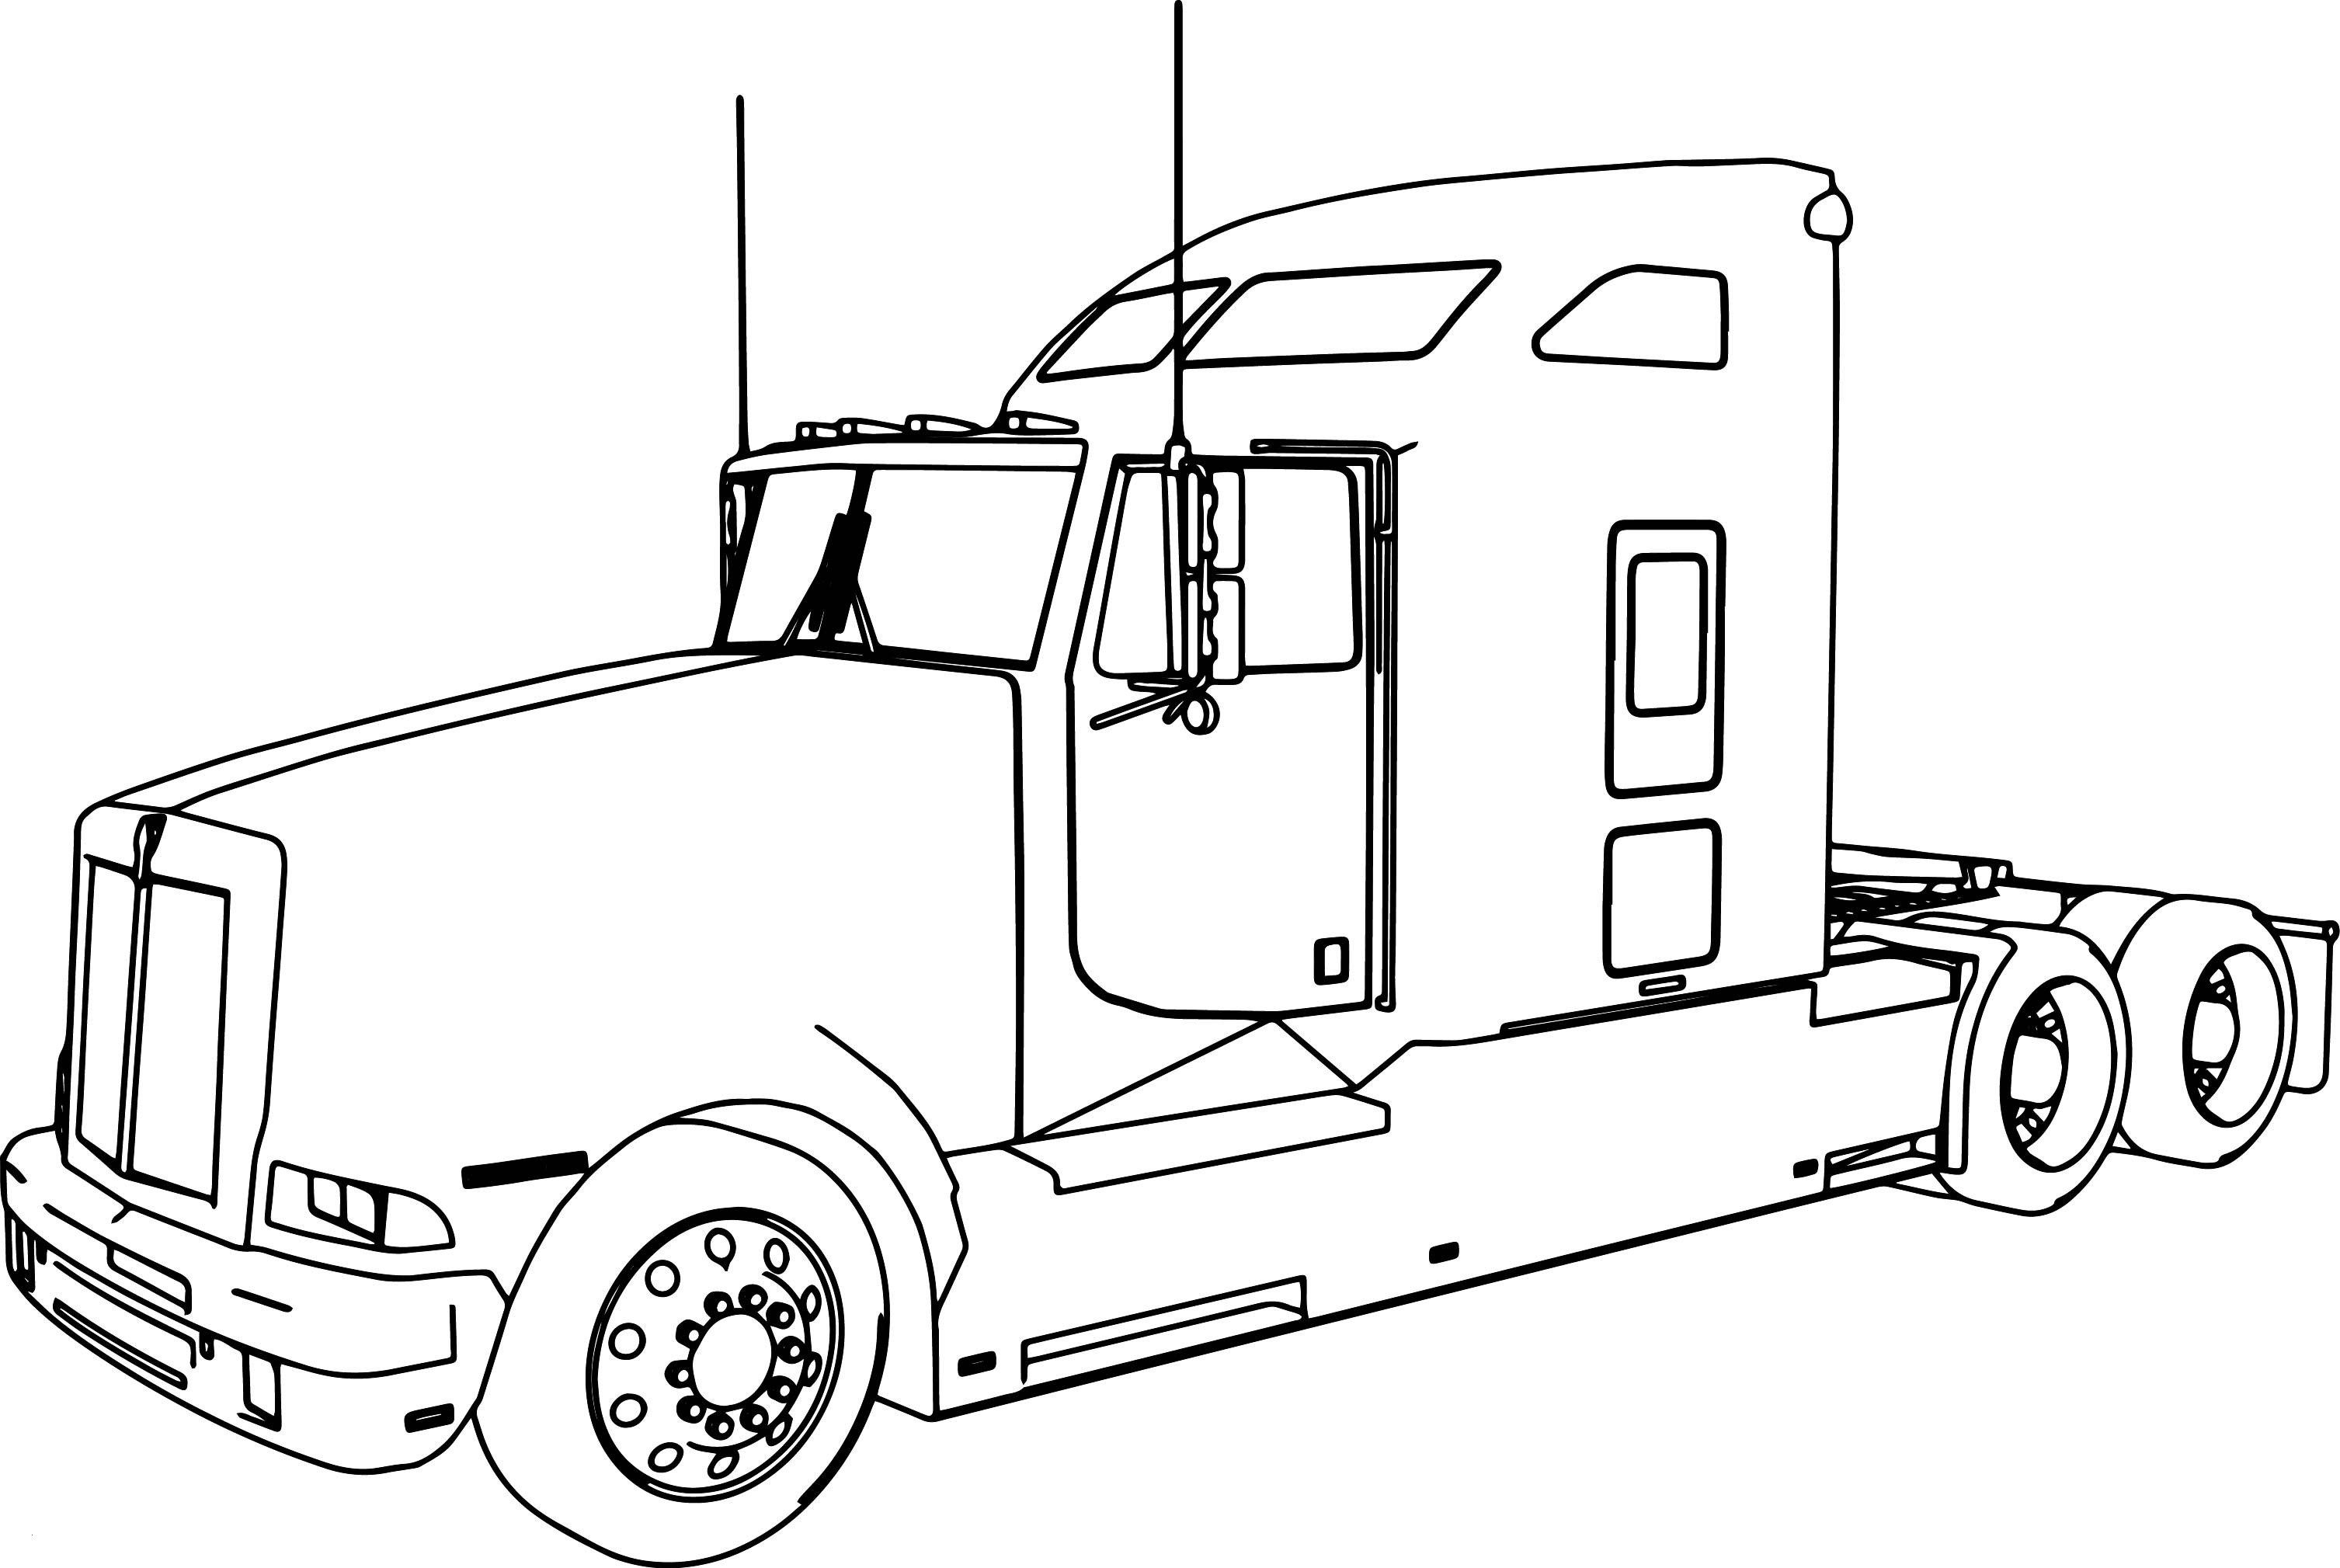 25+ Pretty Photo of Semi Truck Coloring Pages - davemelillo.com | Truck  coloring pages, Semi trucks, Tractor coloring pages